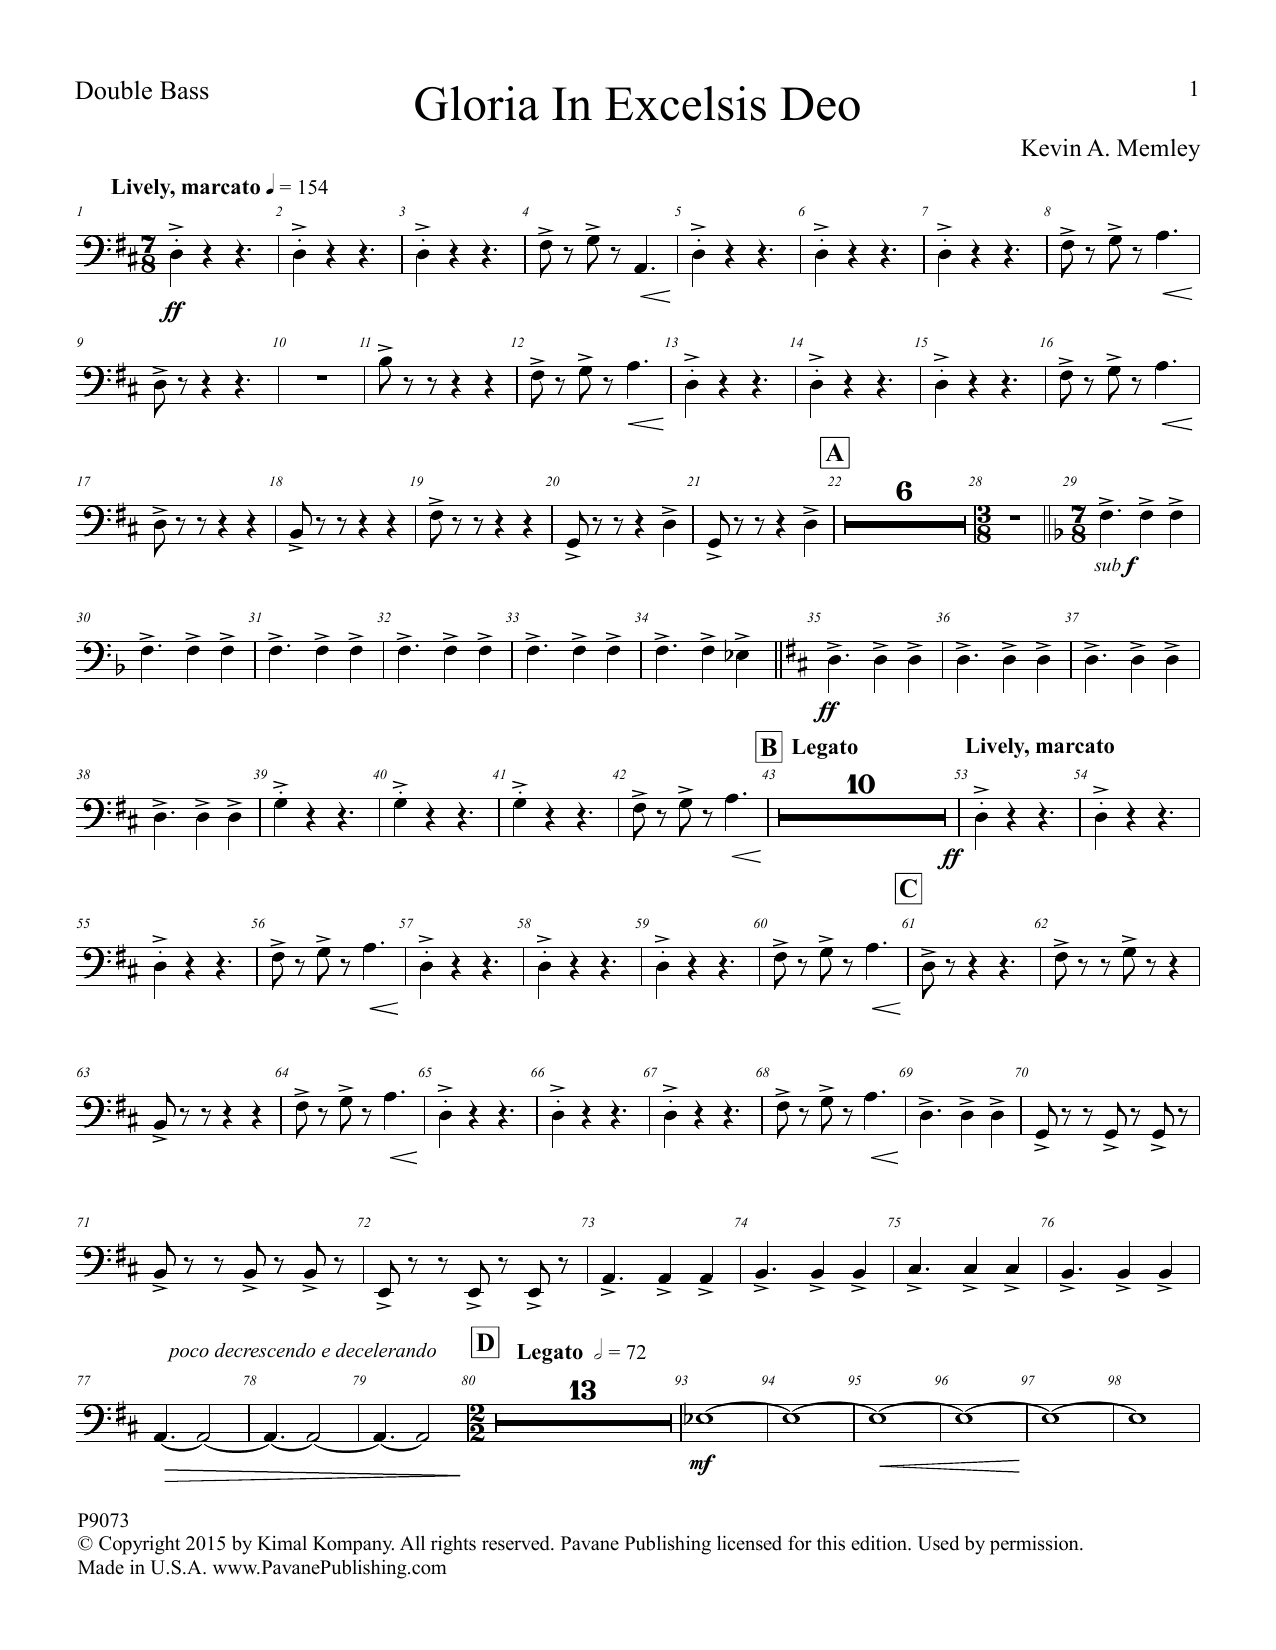 Download Kevin A. Memley Gloria in Excelsis Deo - Double Bass Sheet Music